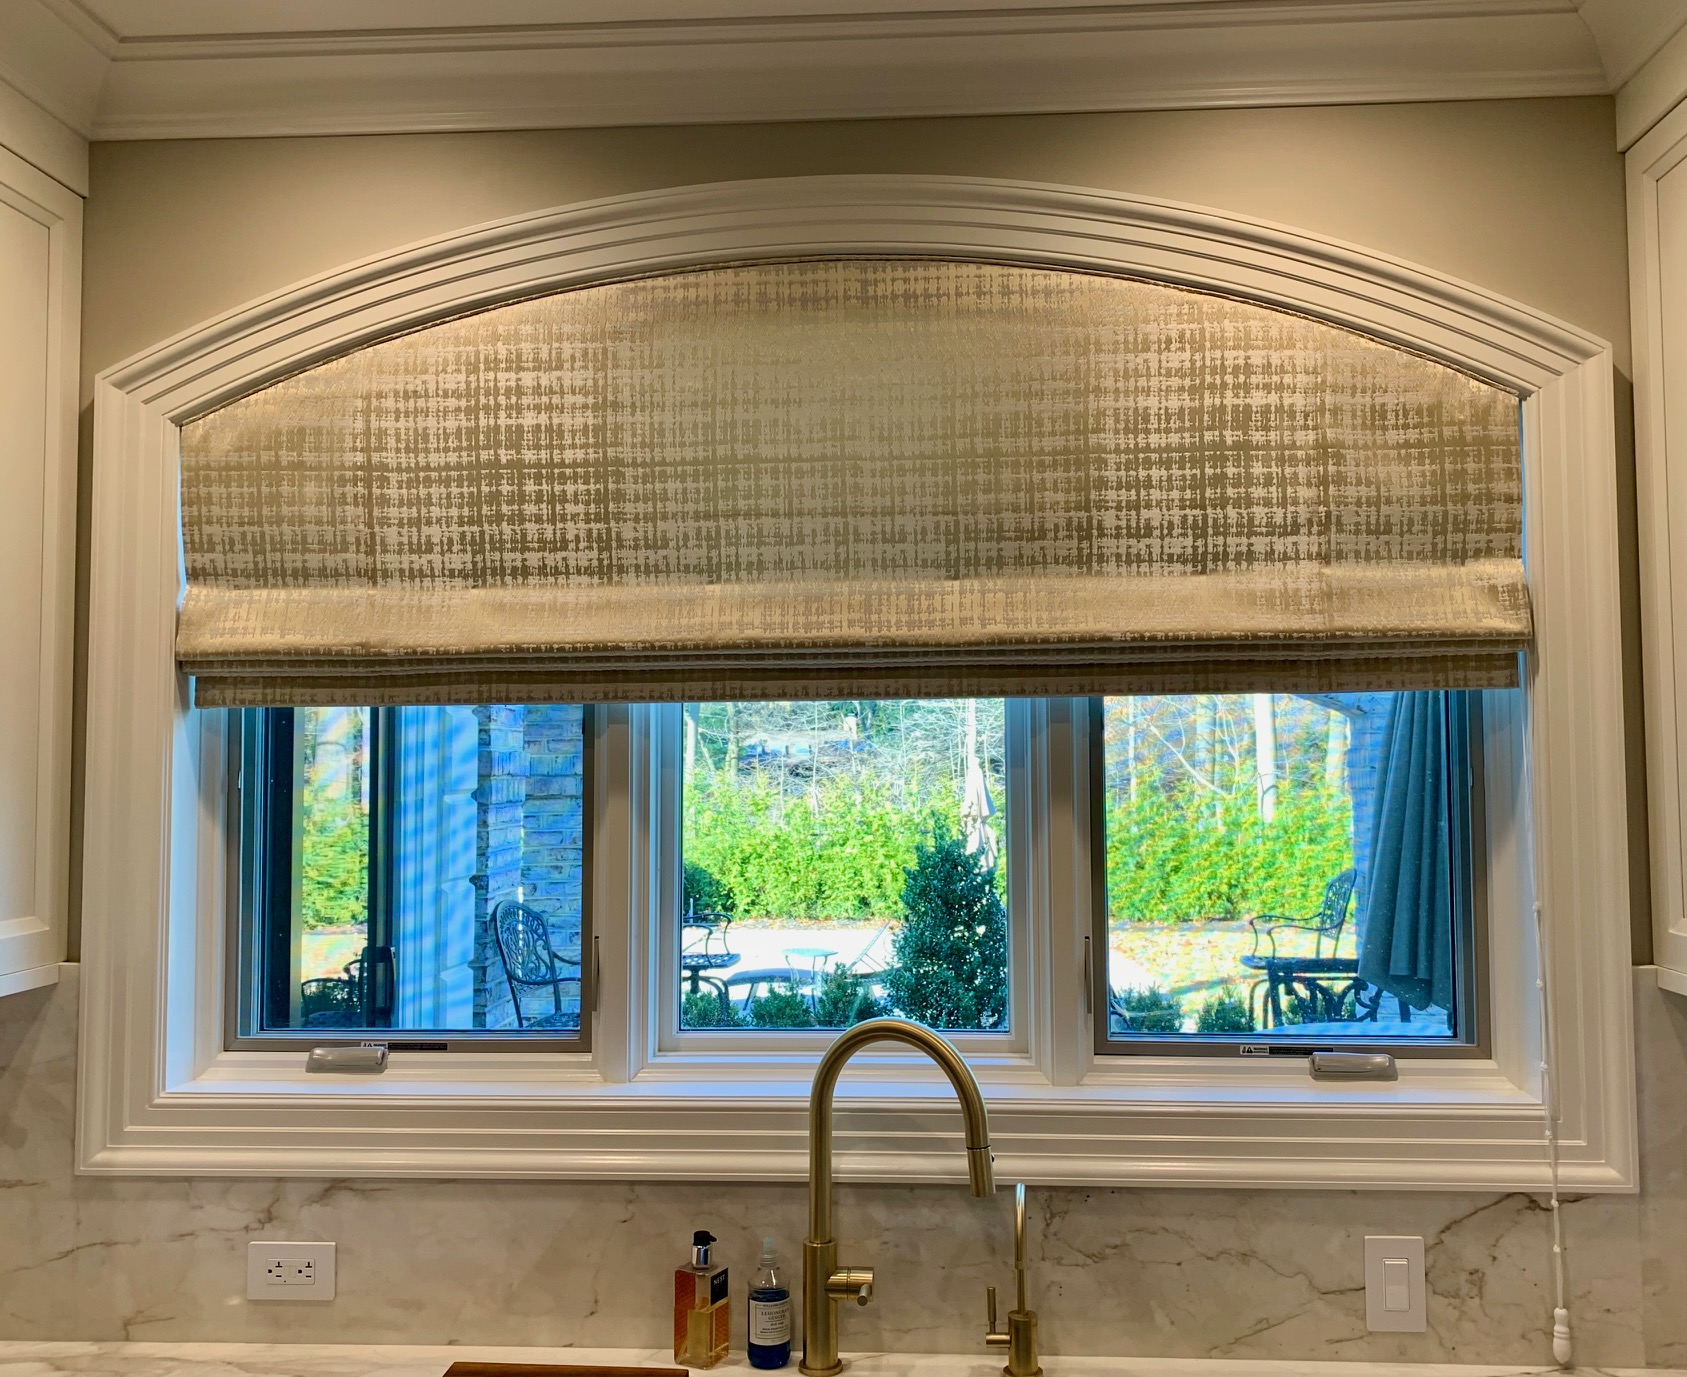 Arched Roman Shade Using Norbar Fabric in Kitchen Window 